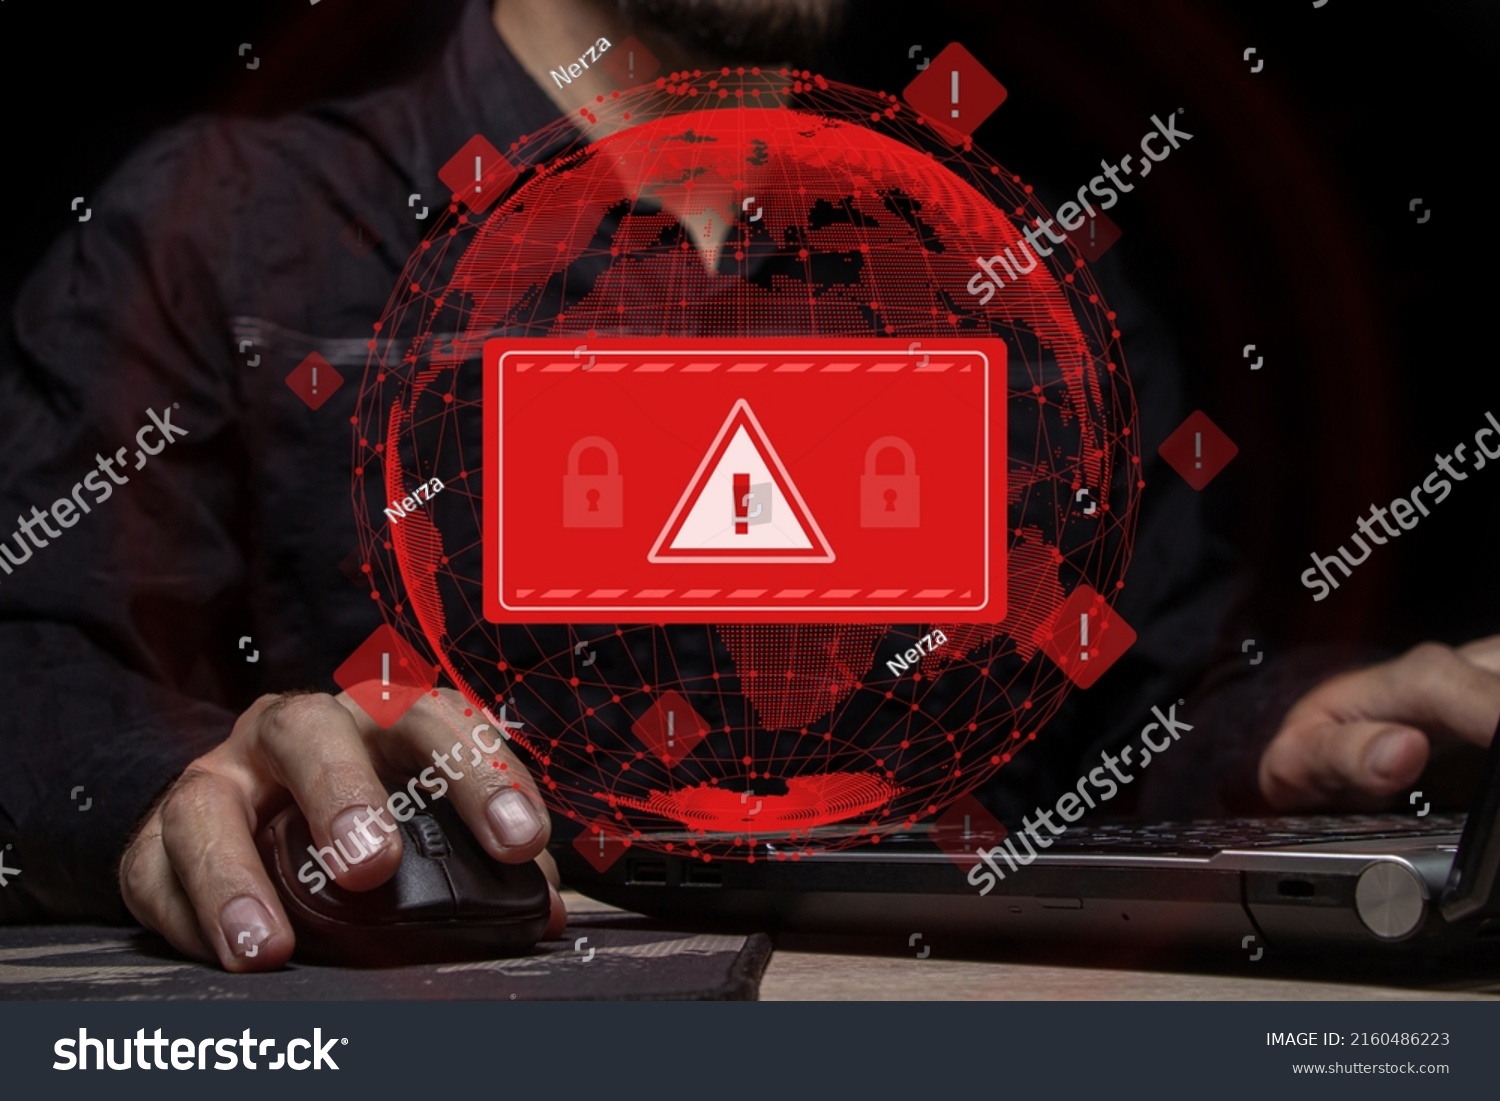 Computer system hack warning. The concept of a cyber attack on a computer network. Malicious software, viruses and cybercrime. Hacking personal data	 #2160486223